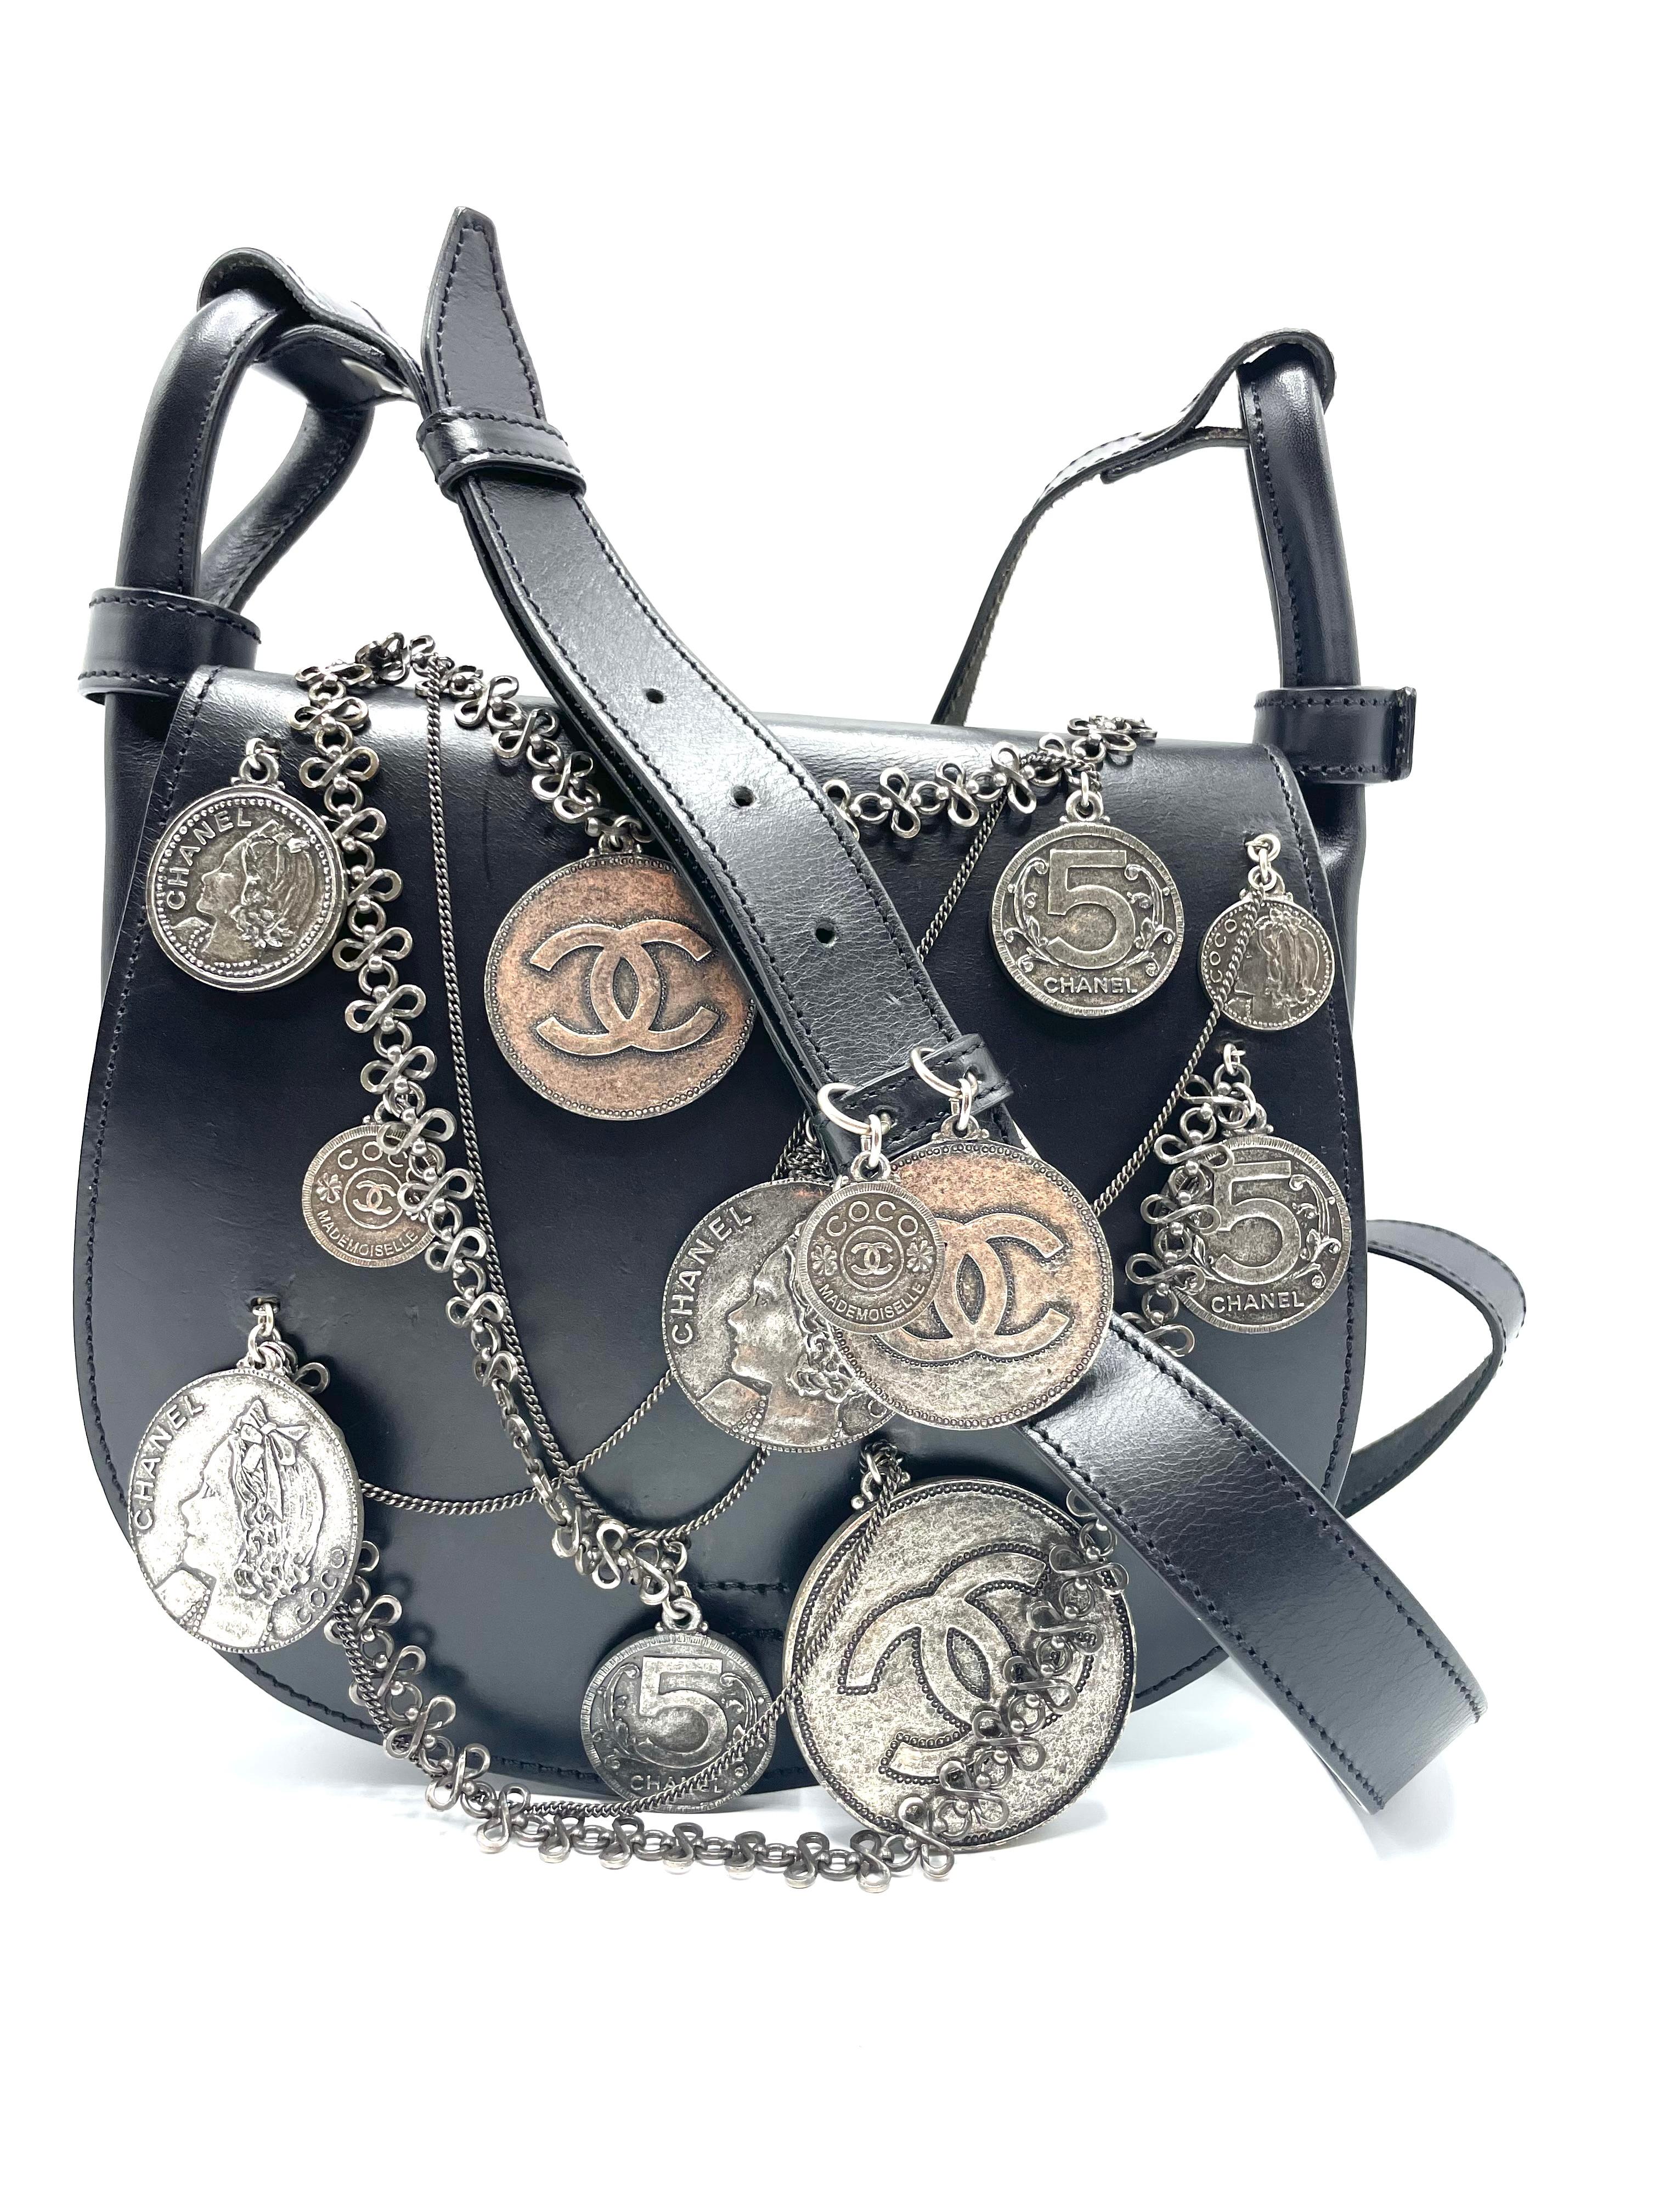 Chanel Coin Medallion Saddle Messenger Leather Small.  A collectible item that is ideal for collectors. This avant-garde saddle bag is crafted from black leather and includes an adjustable leather shoulder strap, overlay chains with Chanel